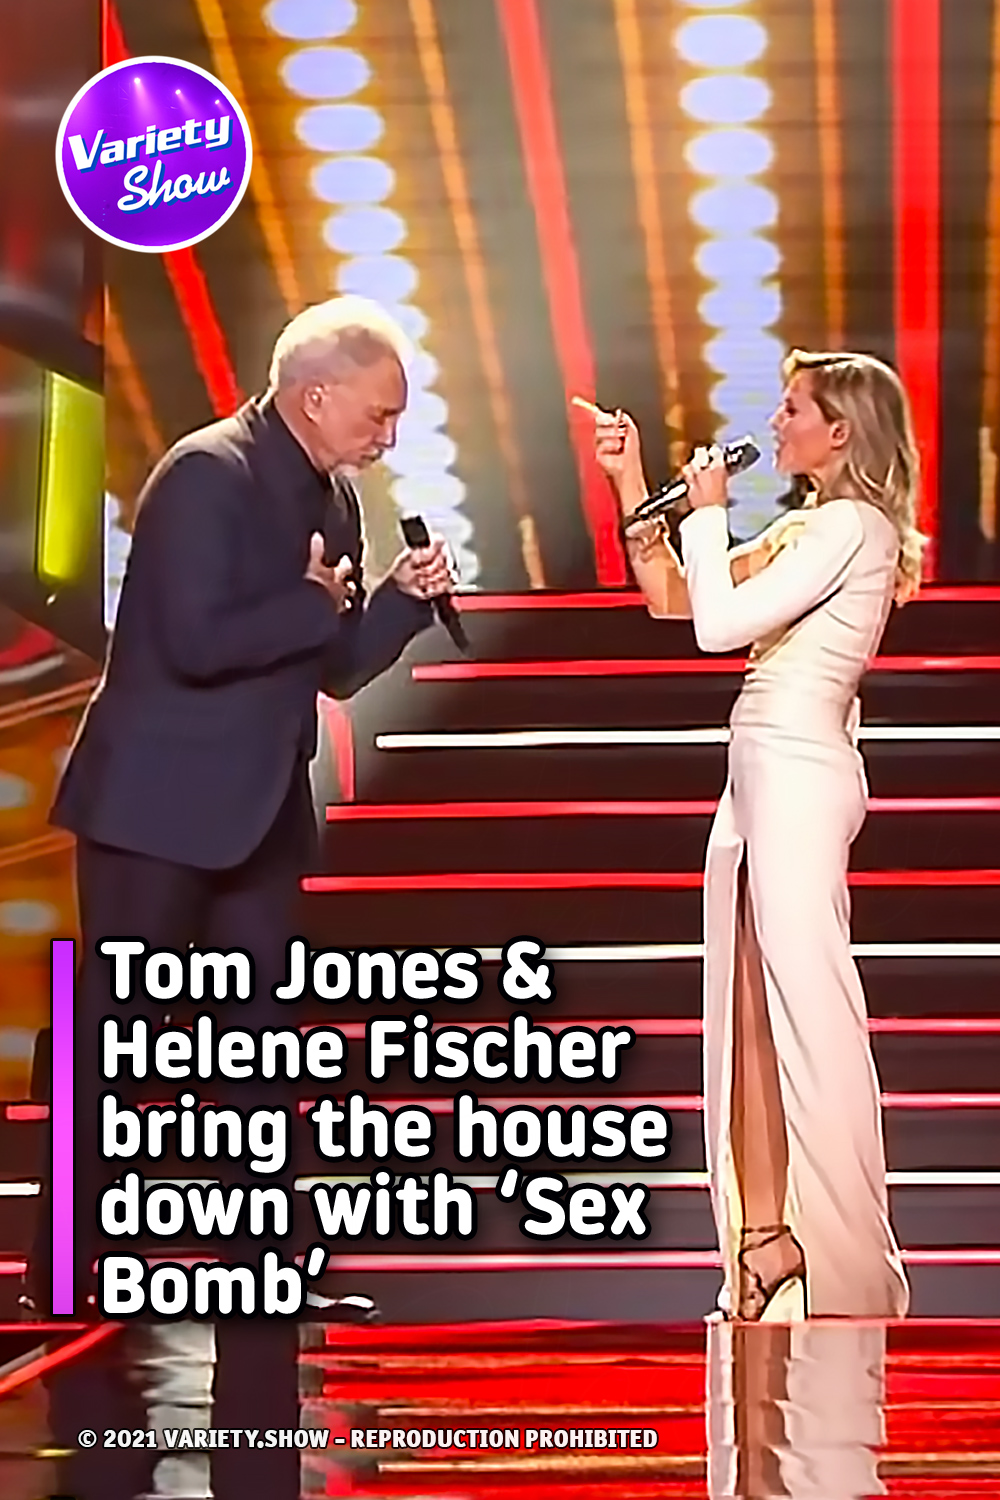 Tom Jones & Helene Fischer bring the house down with ‘Sex Bomb’